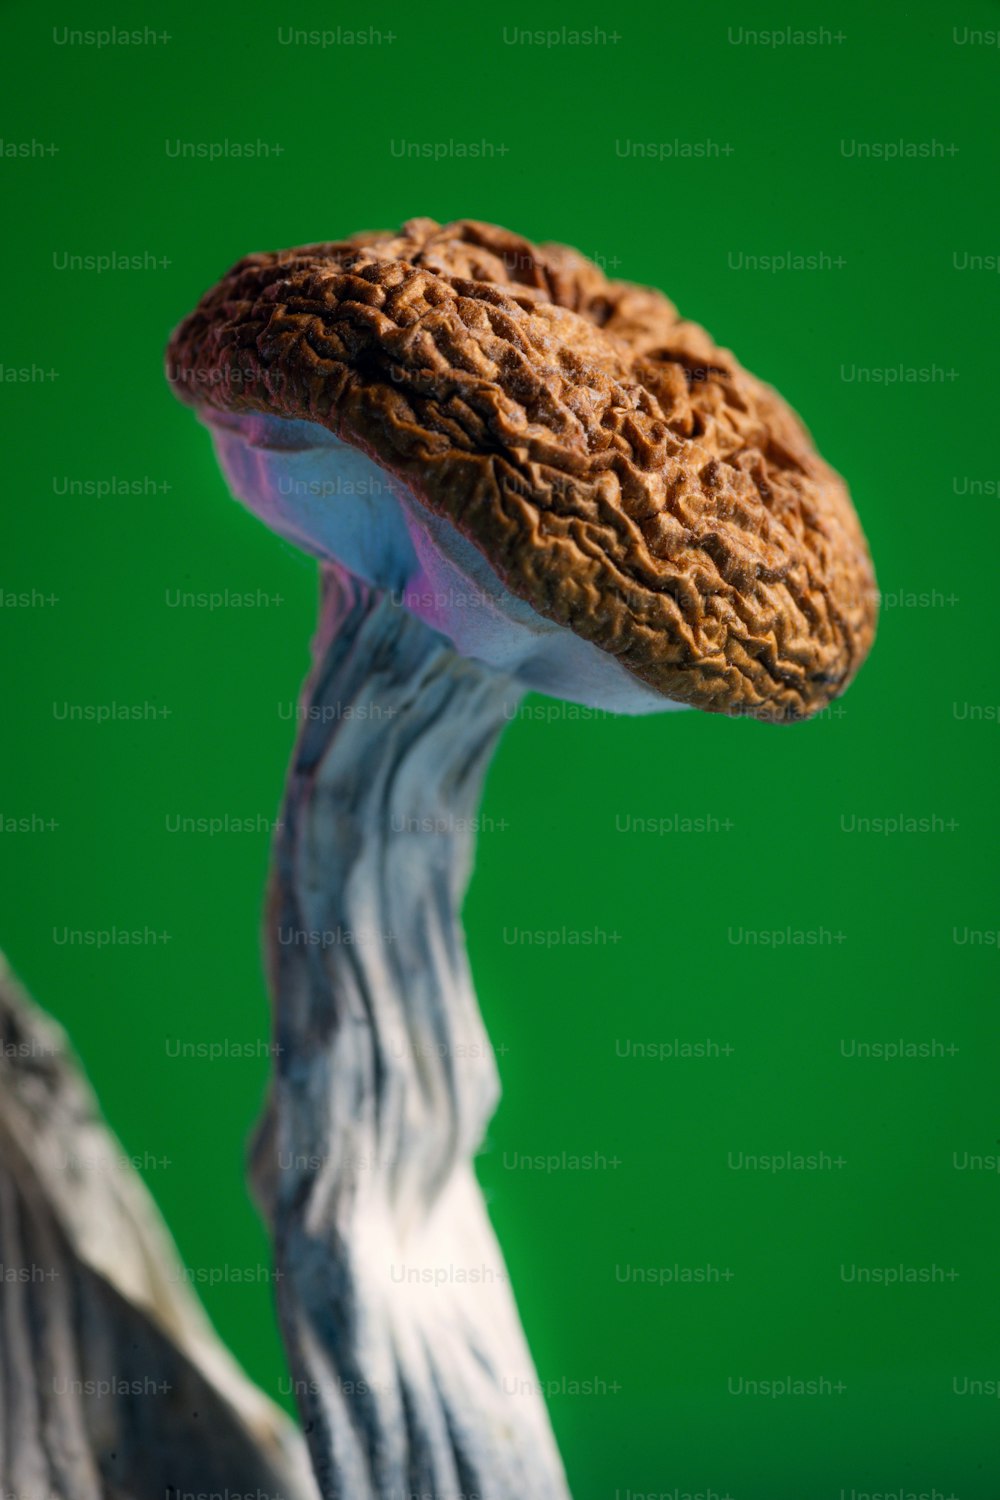 a close up of a mushroom on a green background